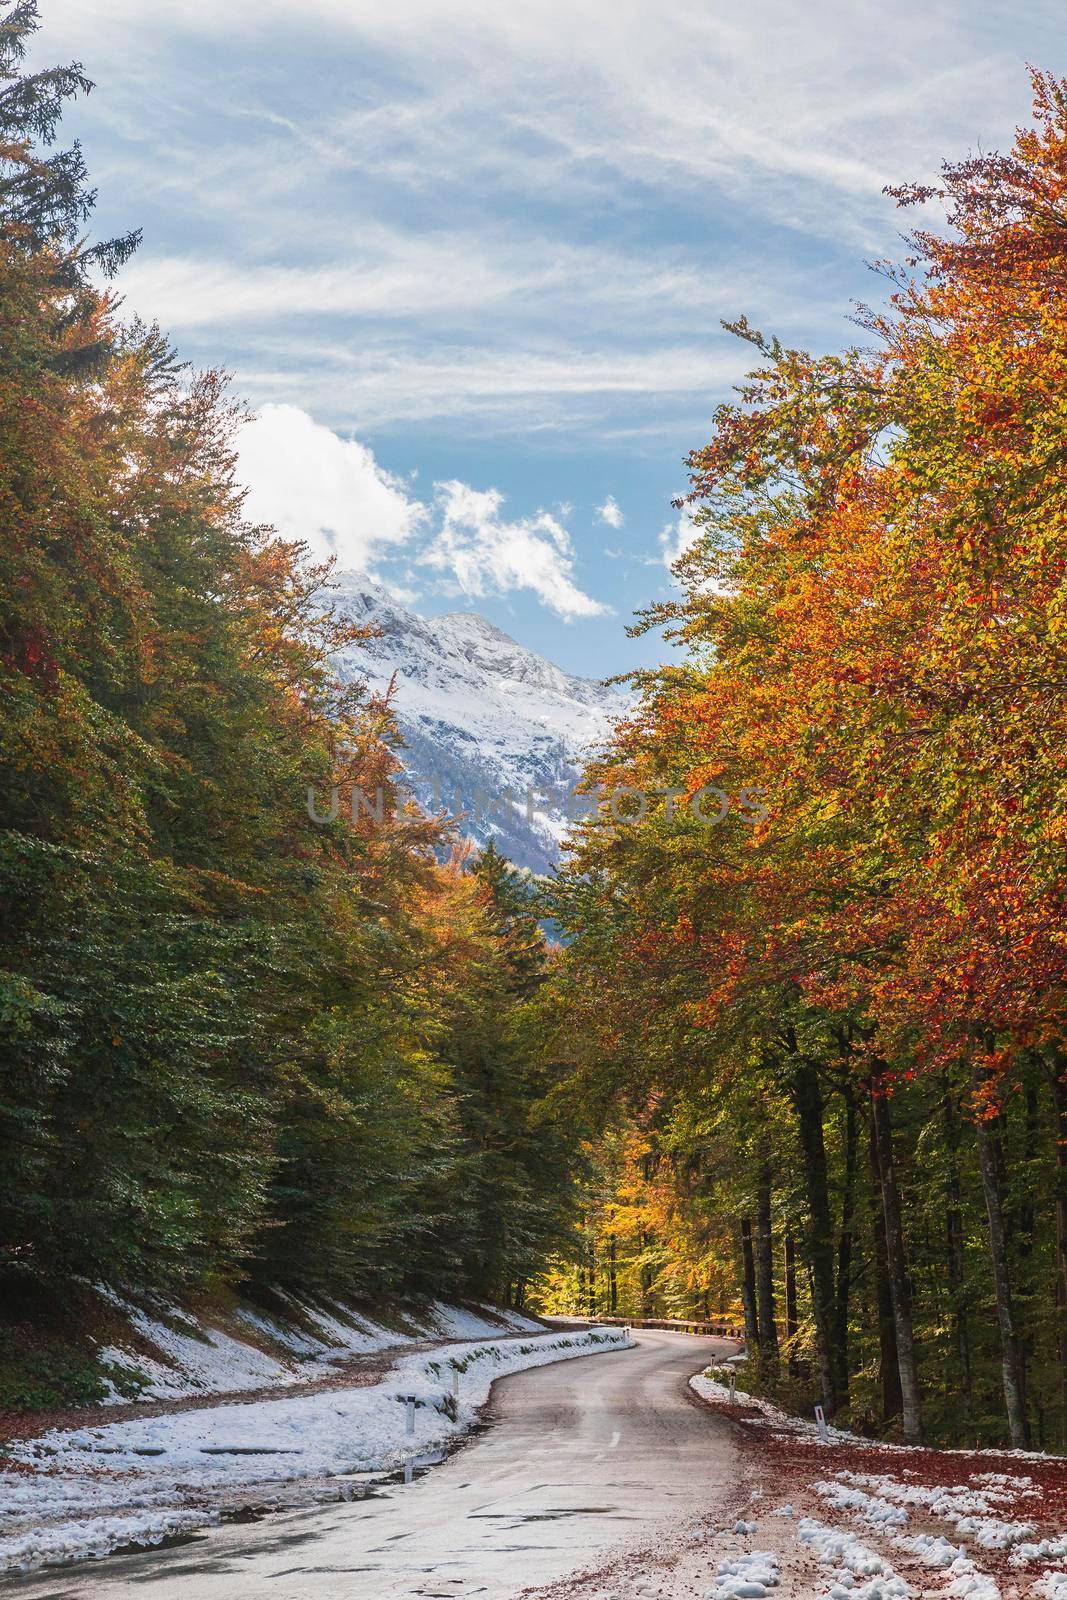 The road in the autumn forest in Slovenia. Julian Alps covered with snow.